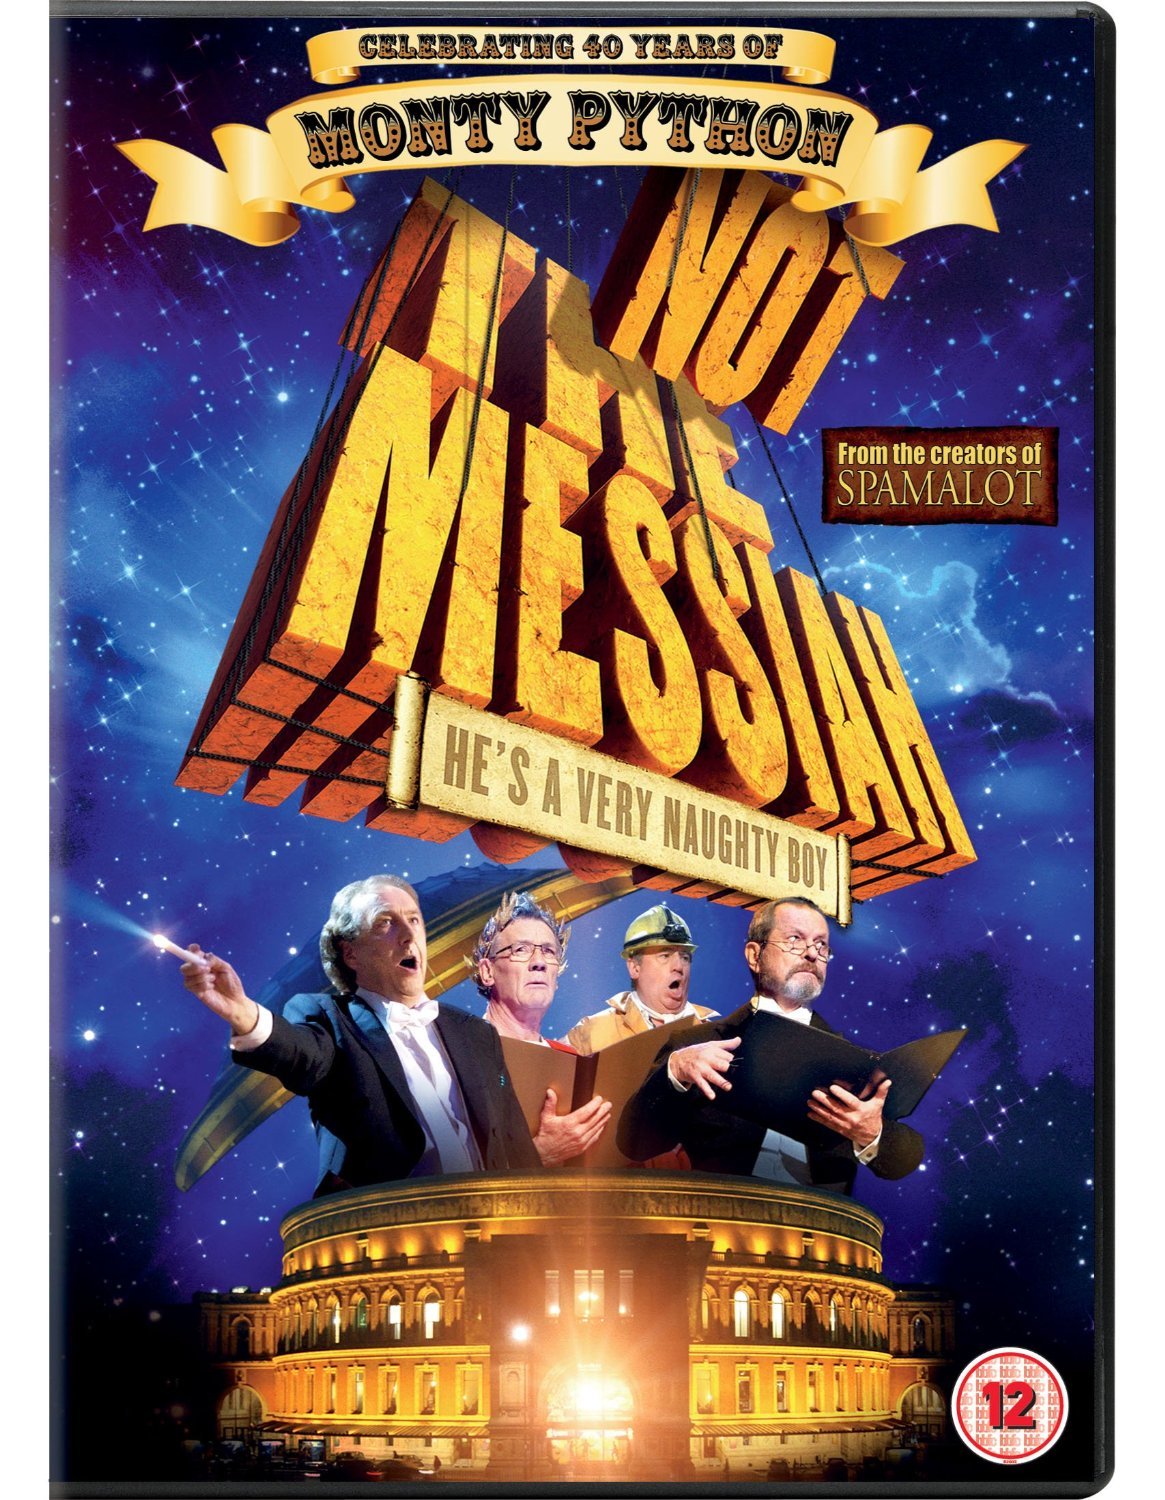 L'affiche du film Not the Messiah: He's a Very Naughty Boy